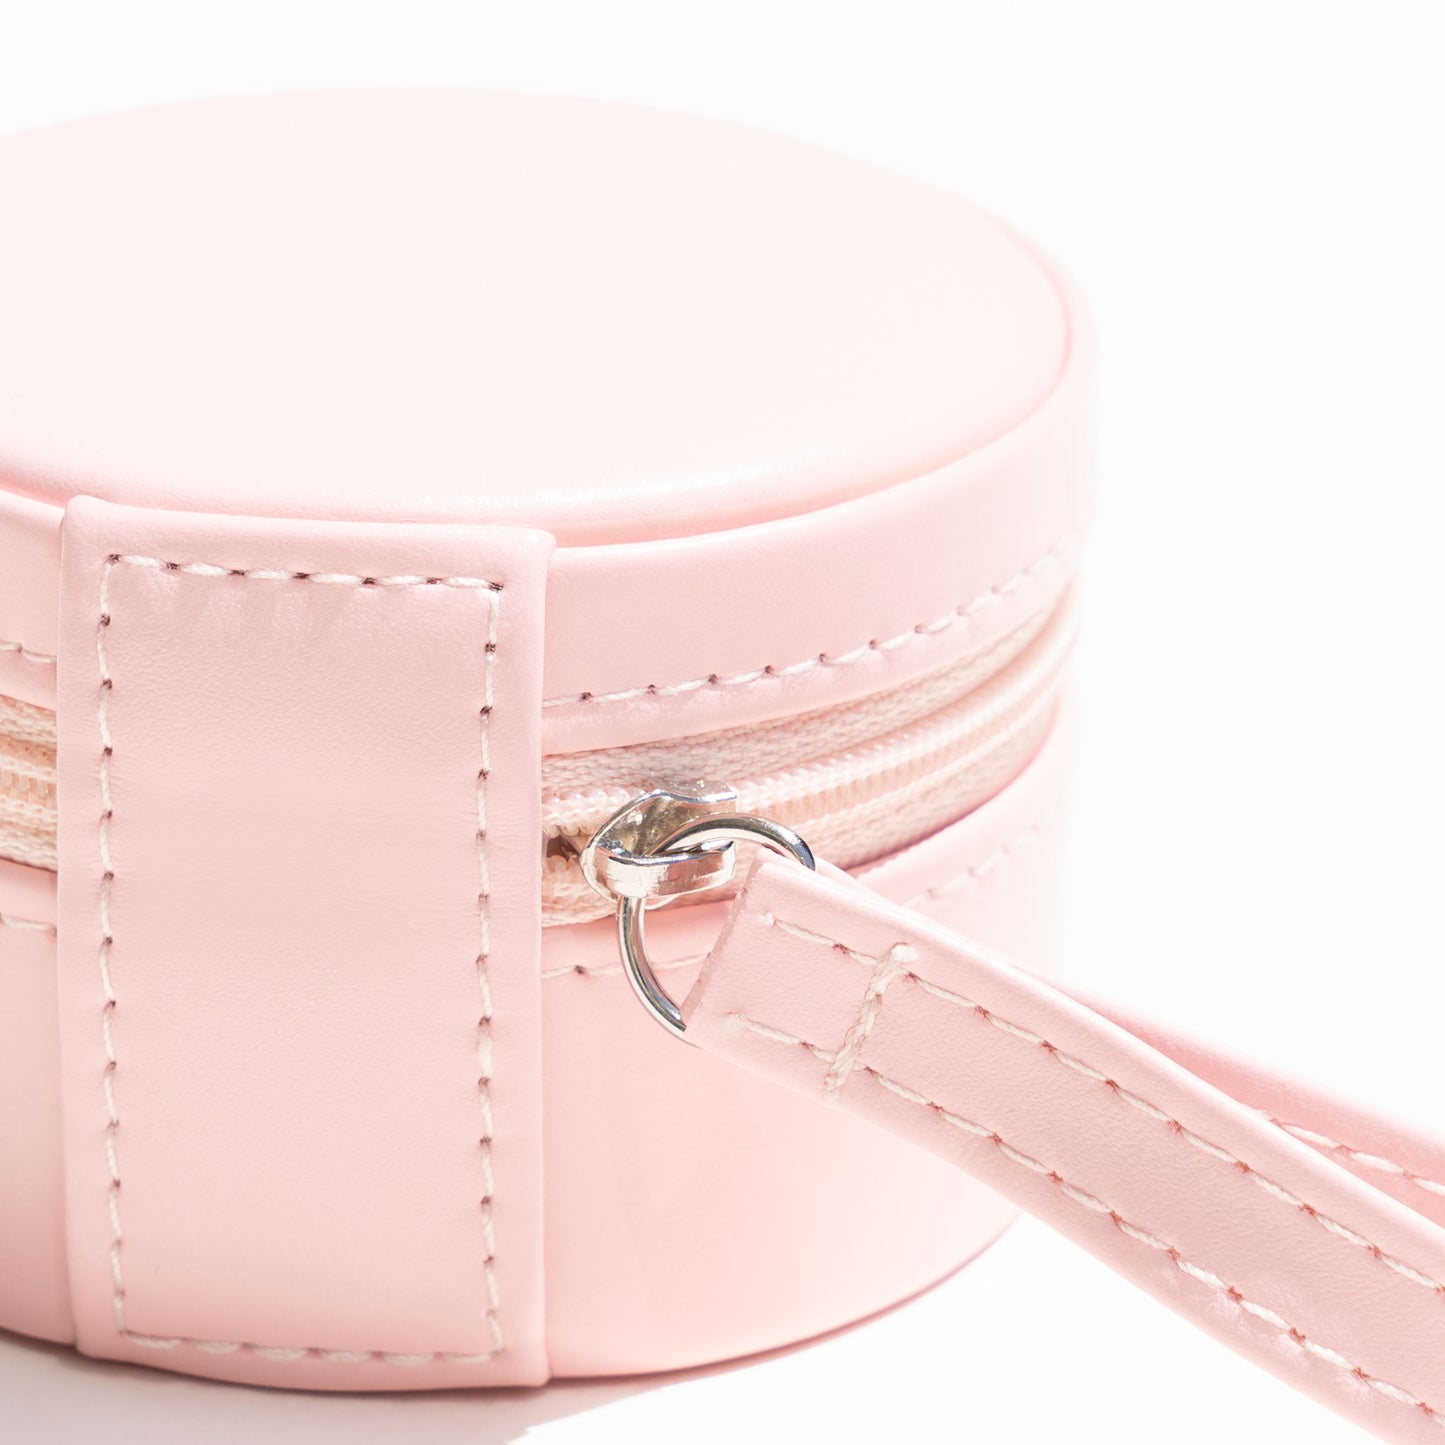 Pink Vegan Leather Travel Jewelry Box with a small wristlet for easy holding.